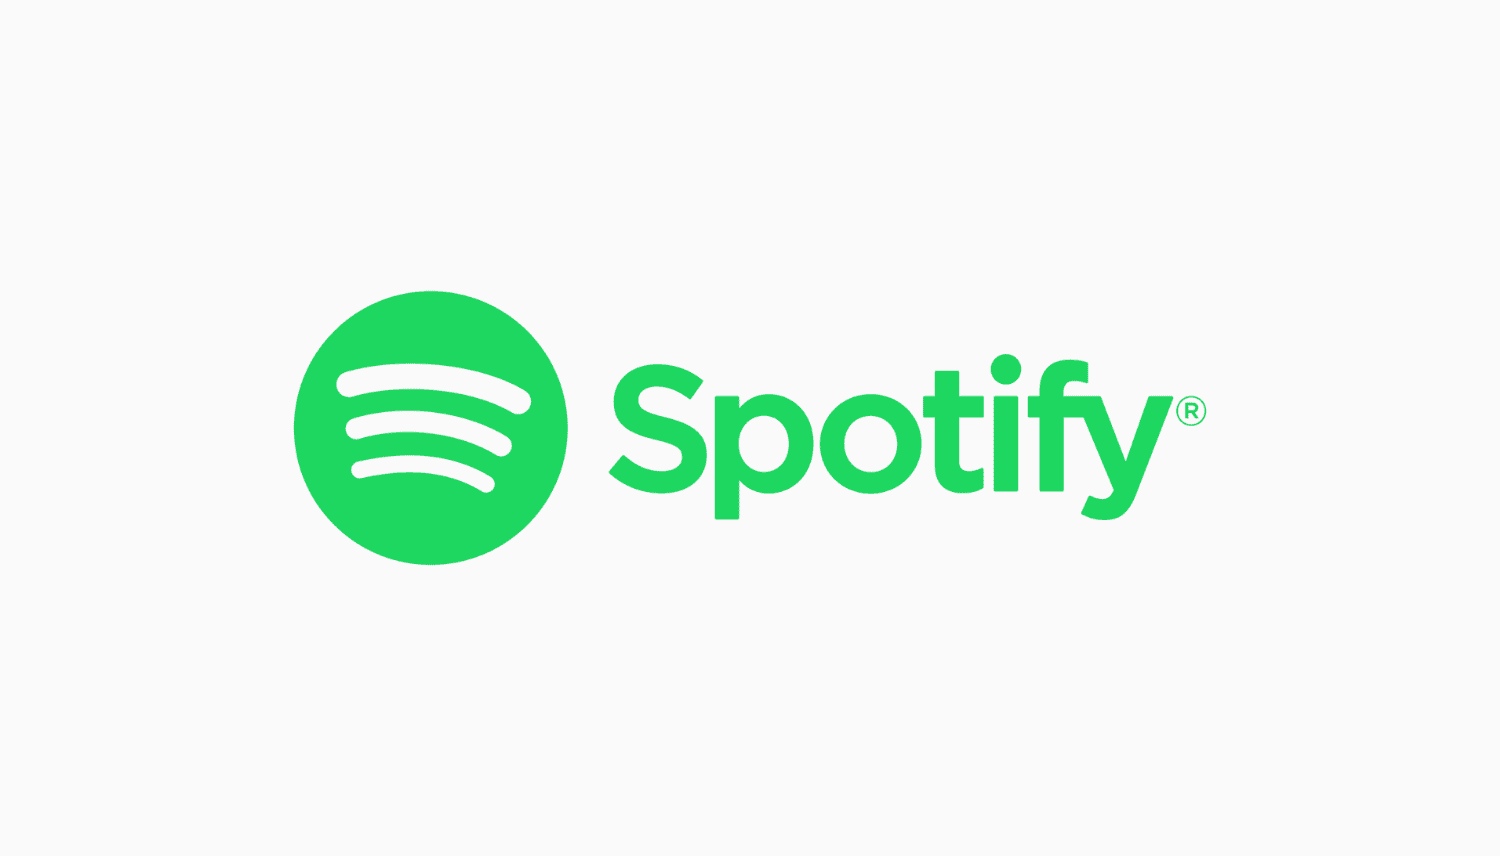 Green Spotify logo and text set against a light gray background